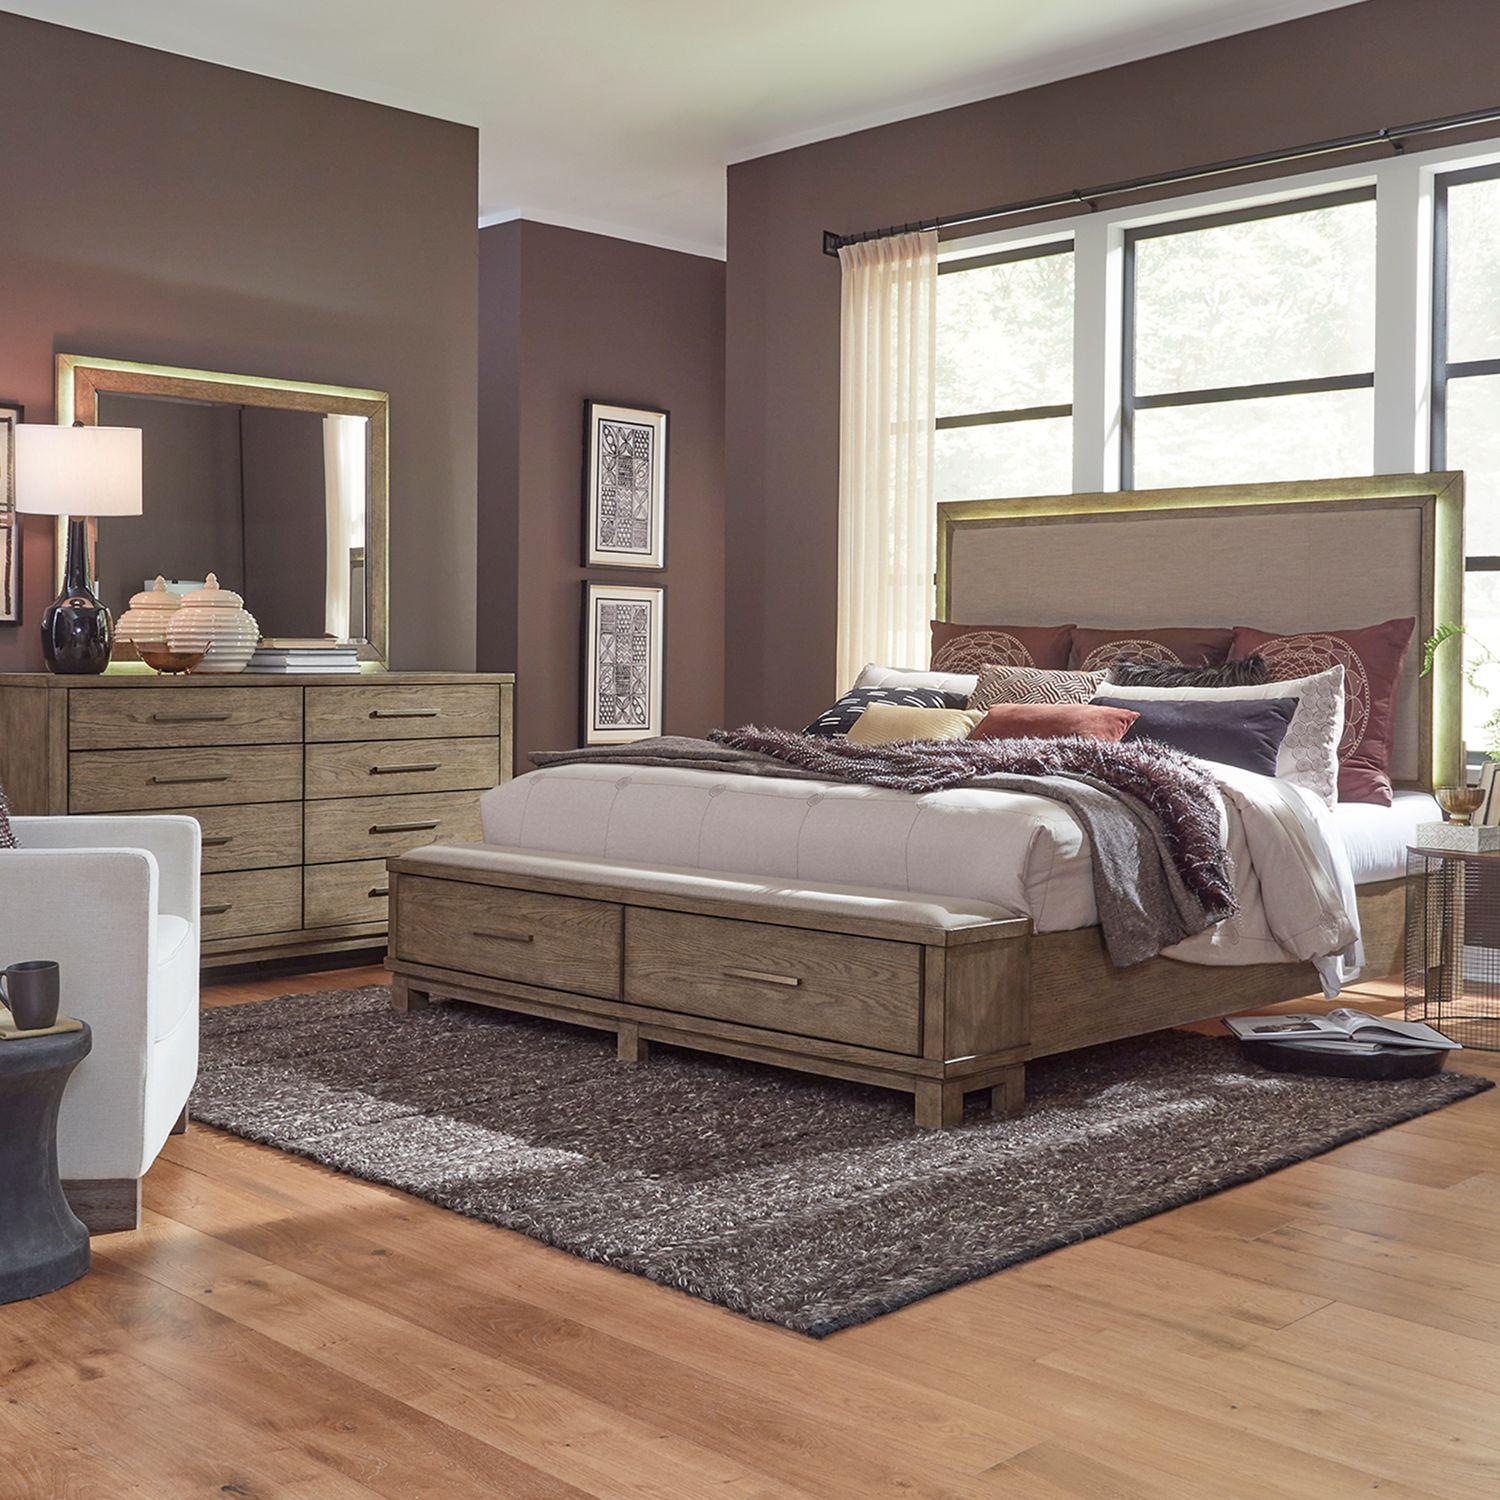 Classic Storage Bedroom Set Canyon Road (876-BR) 876-BR-KSBDM in Brown 